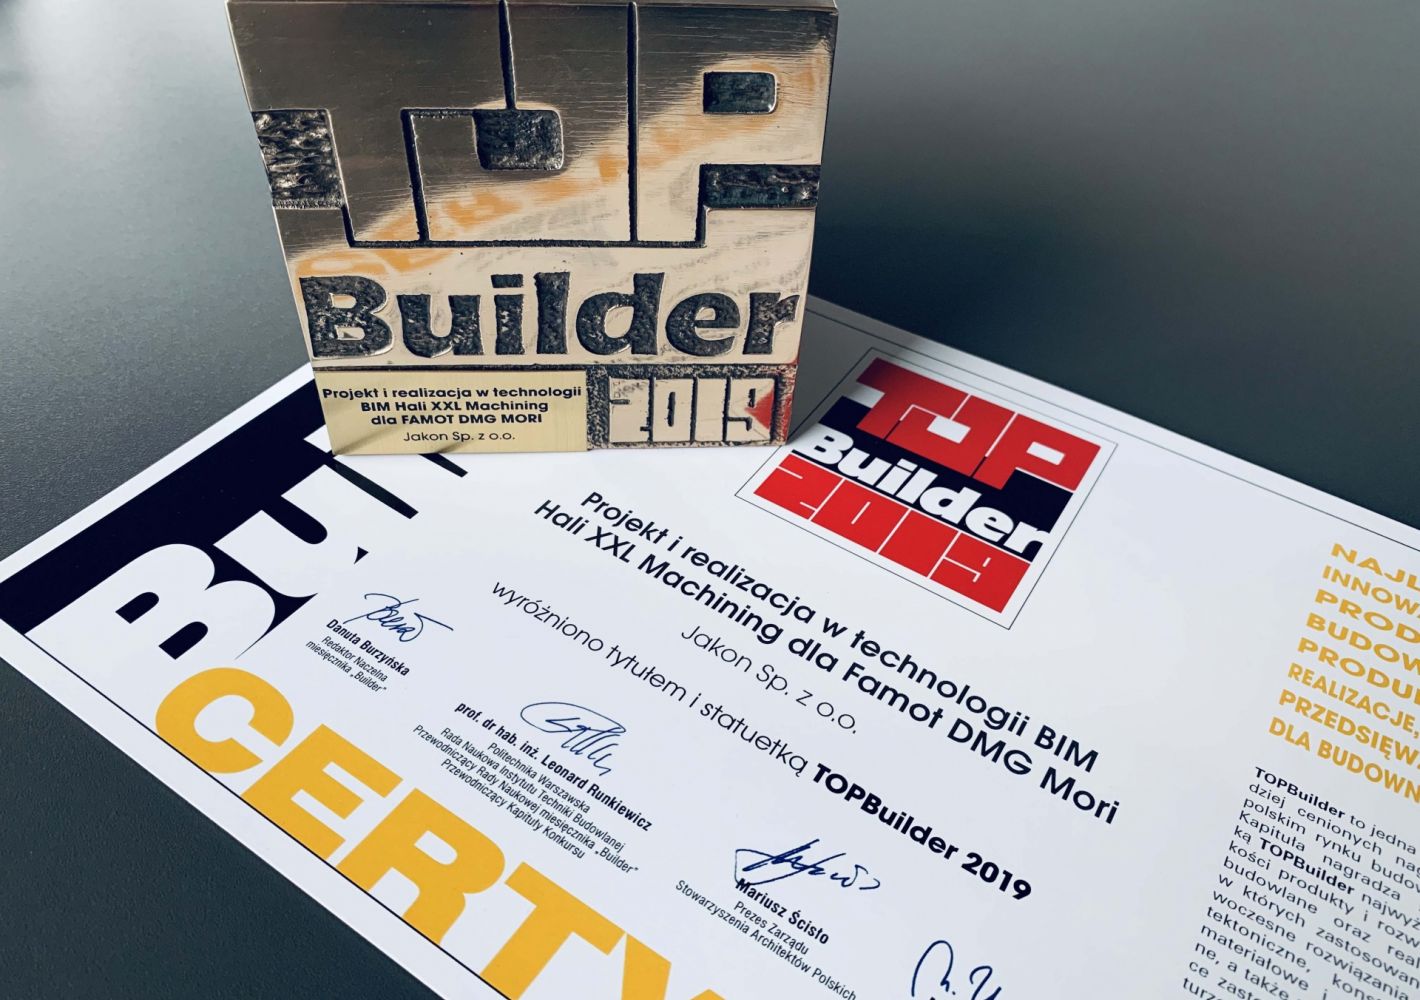 Jakon with the title of Top Builder 2019 